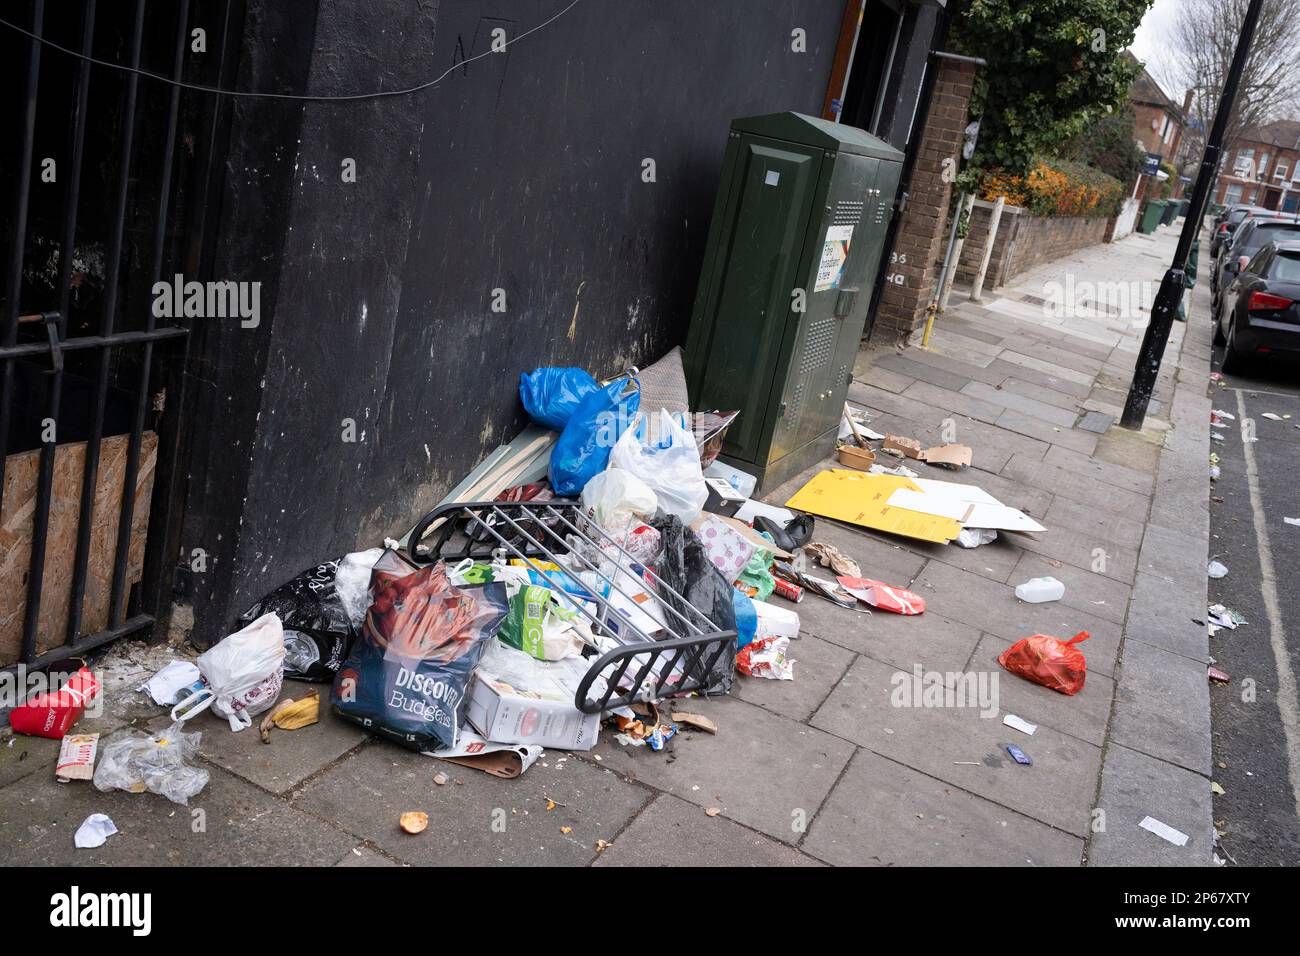 Packaging litter and food waste is spread across the pavement in a Cricklewood side street, on 6th March 2023, in London, England. Stock Photo